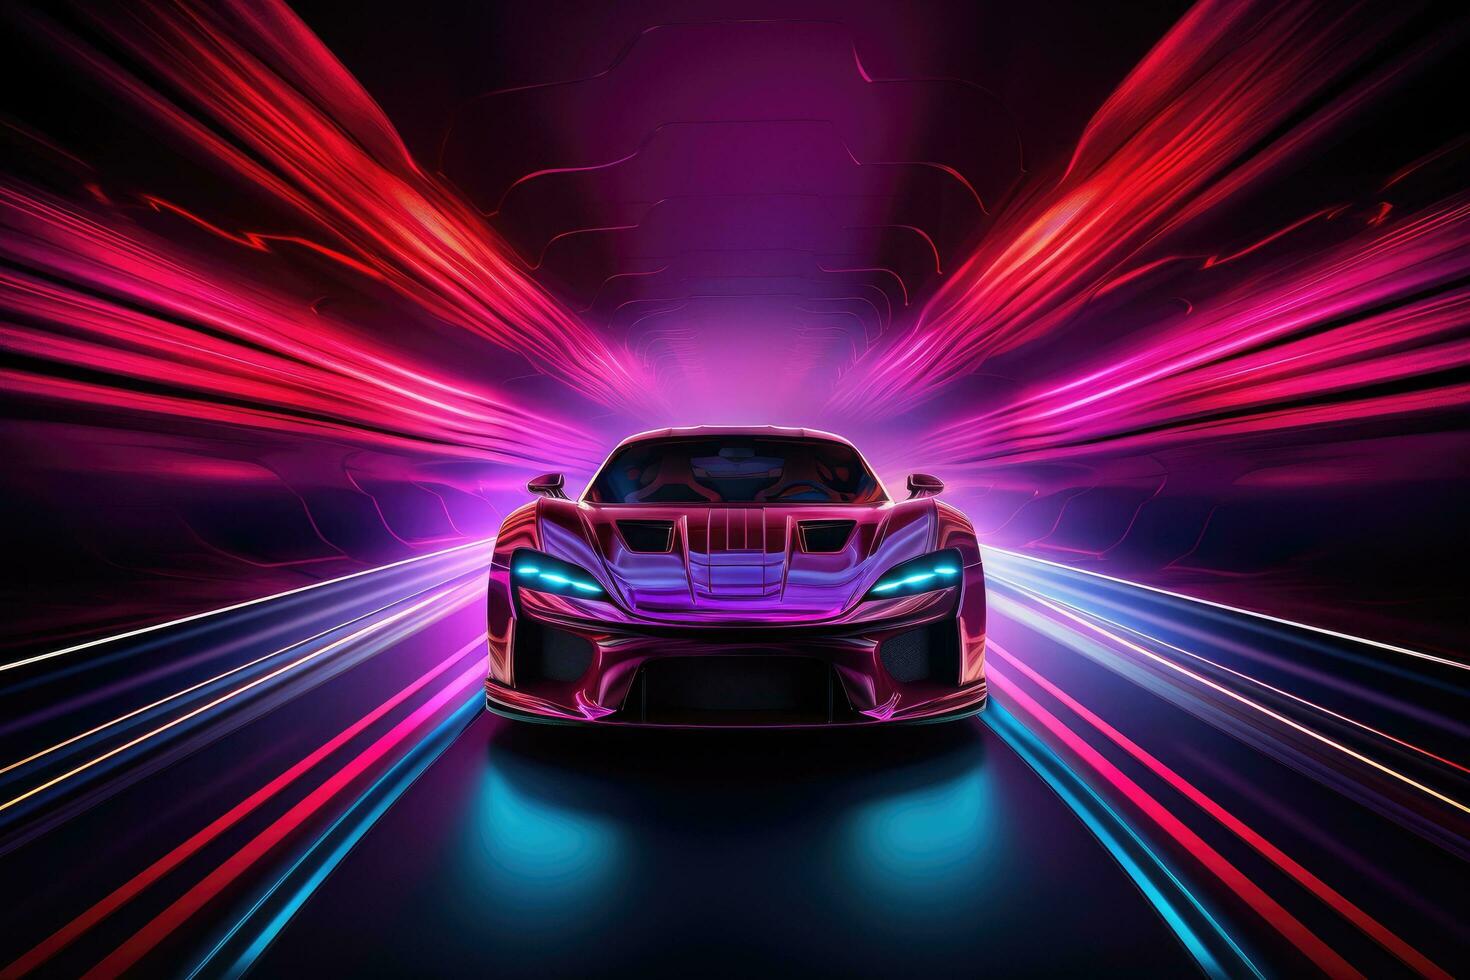 3D rendering of a sports car on a dark background with neon lights, Car in a tunnel with neon lighting, front view, AI Generated photo